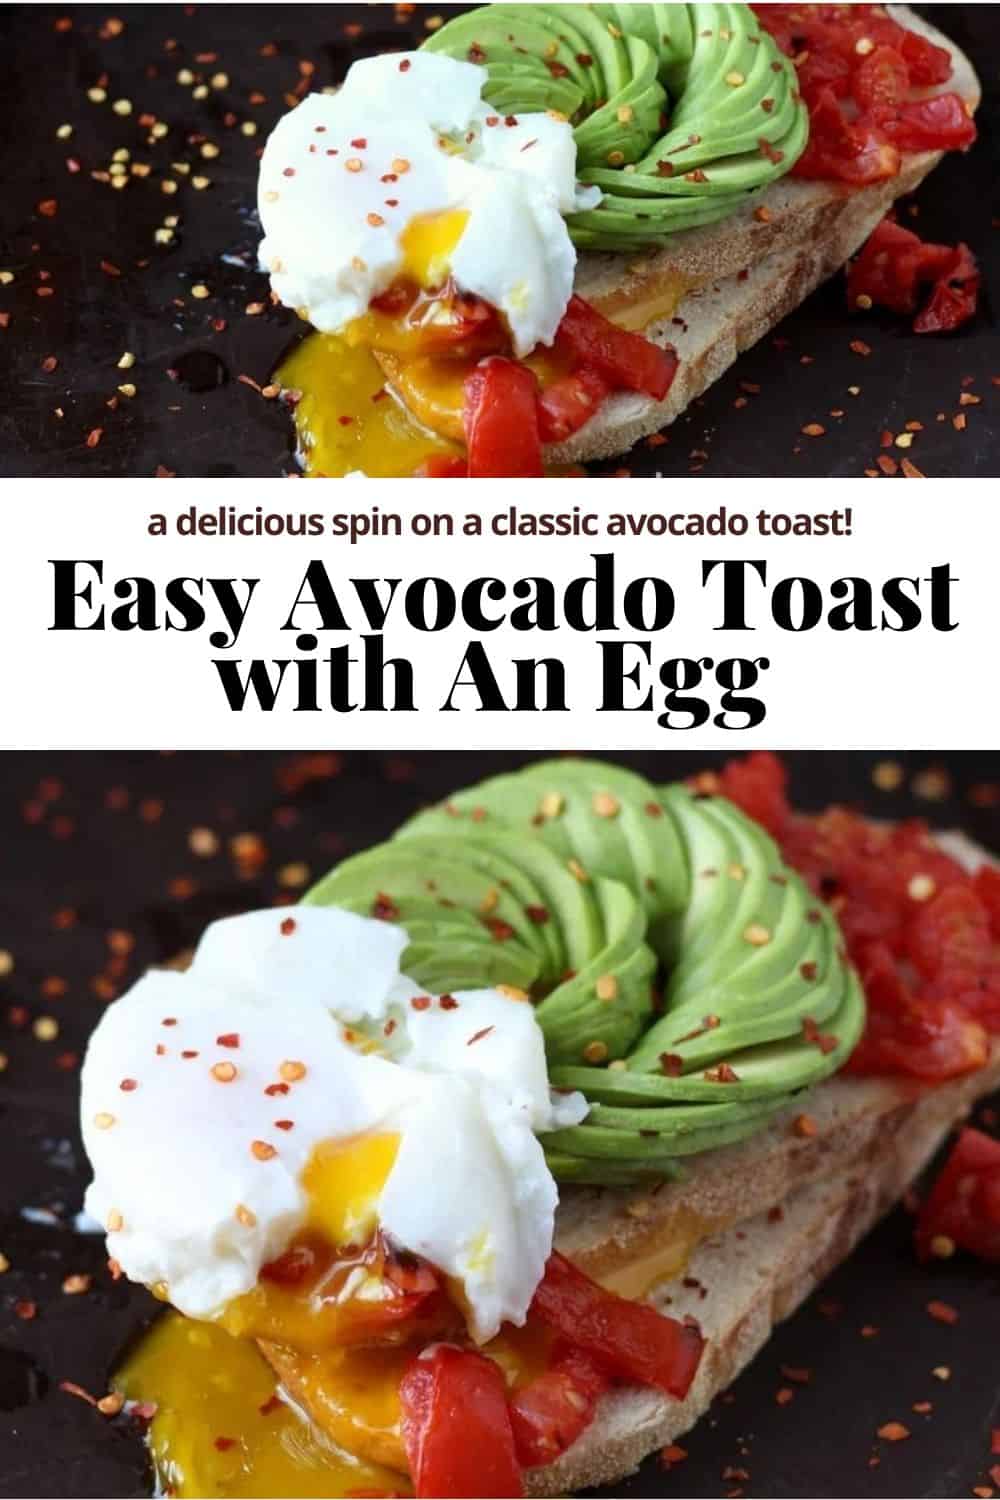 Pinterest image for avocado toast with egg.